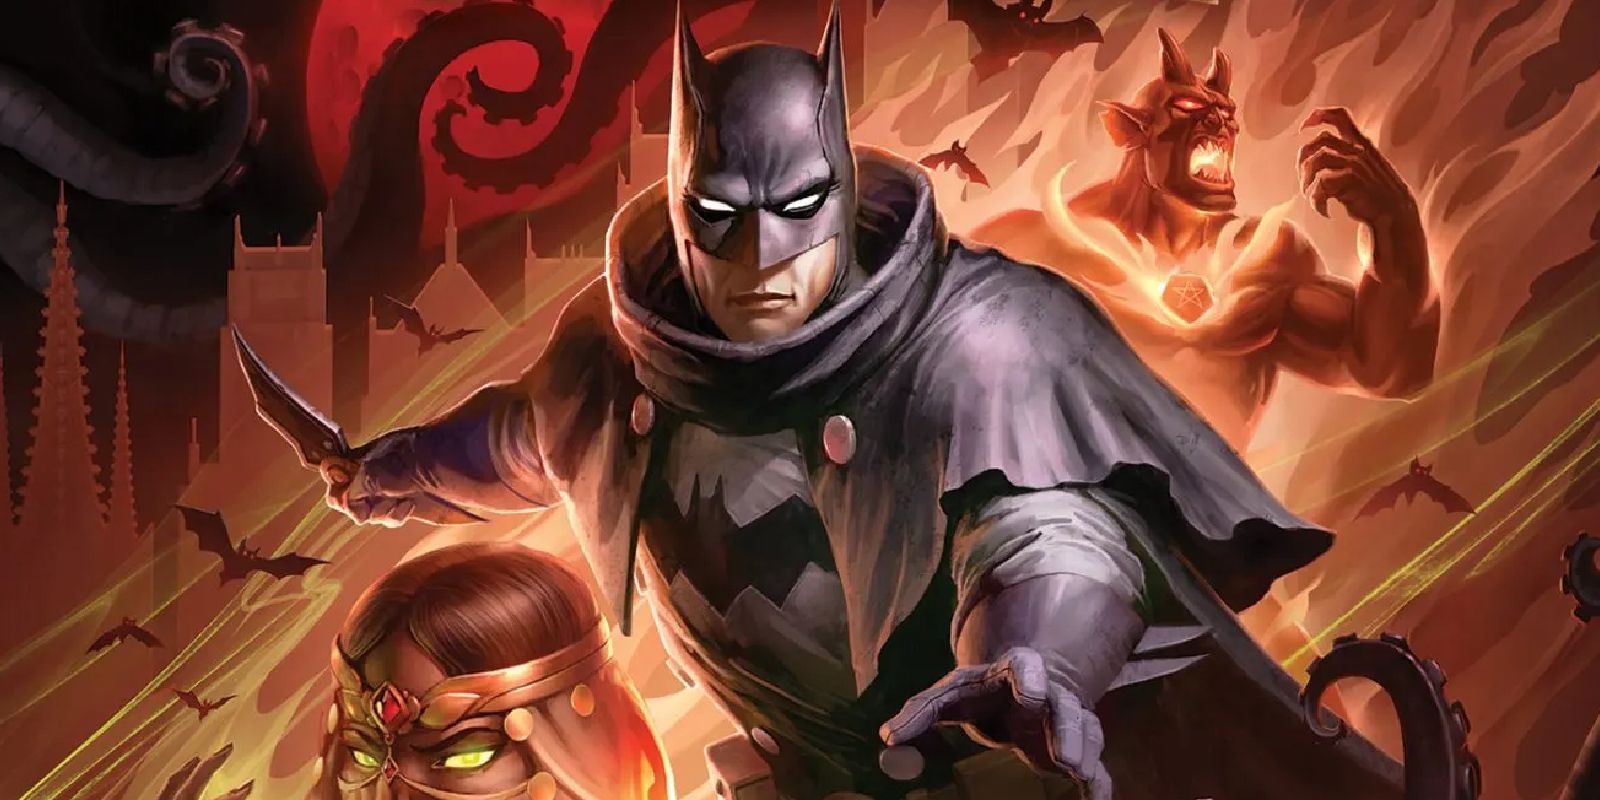 Batman holding a knife alongside Etrigan in The Doom That Came to Gotham poster